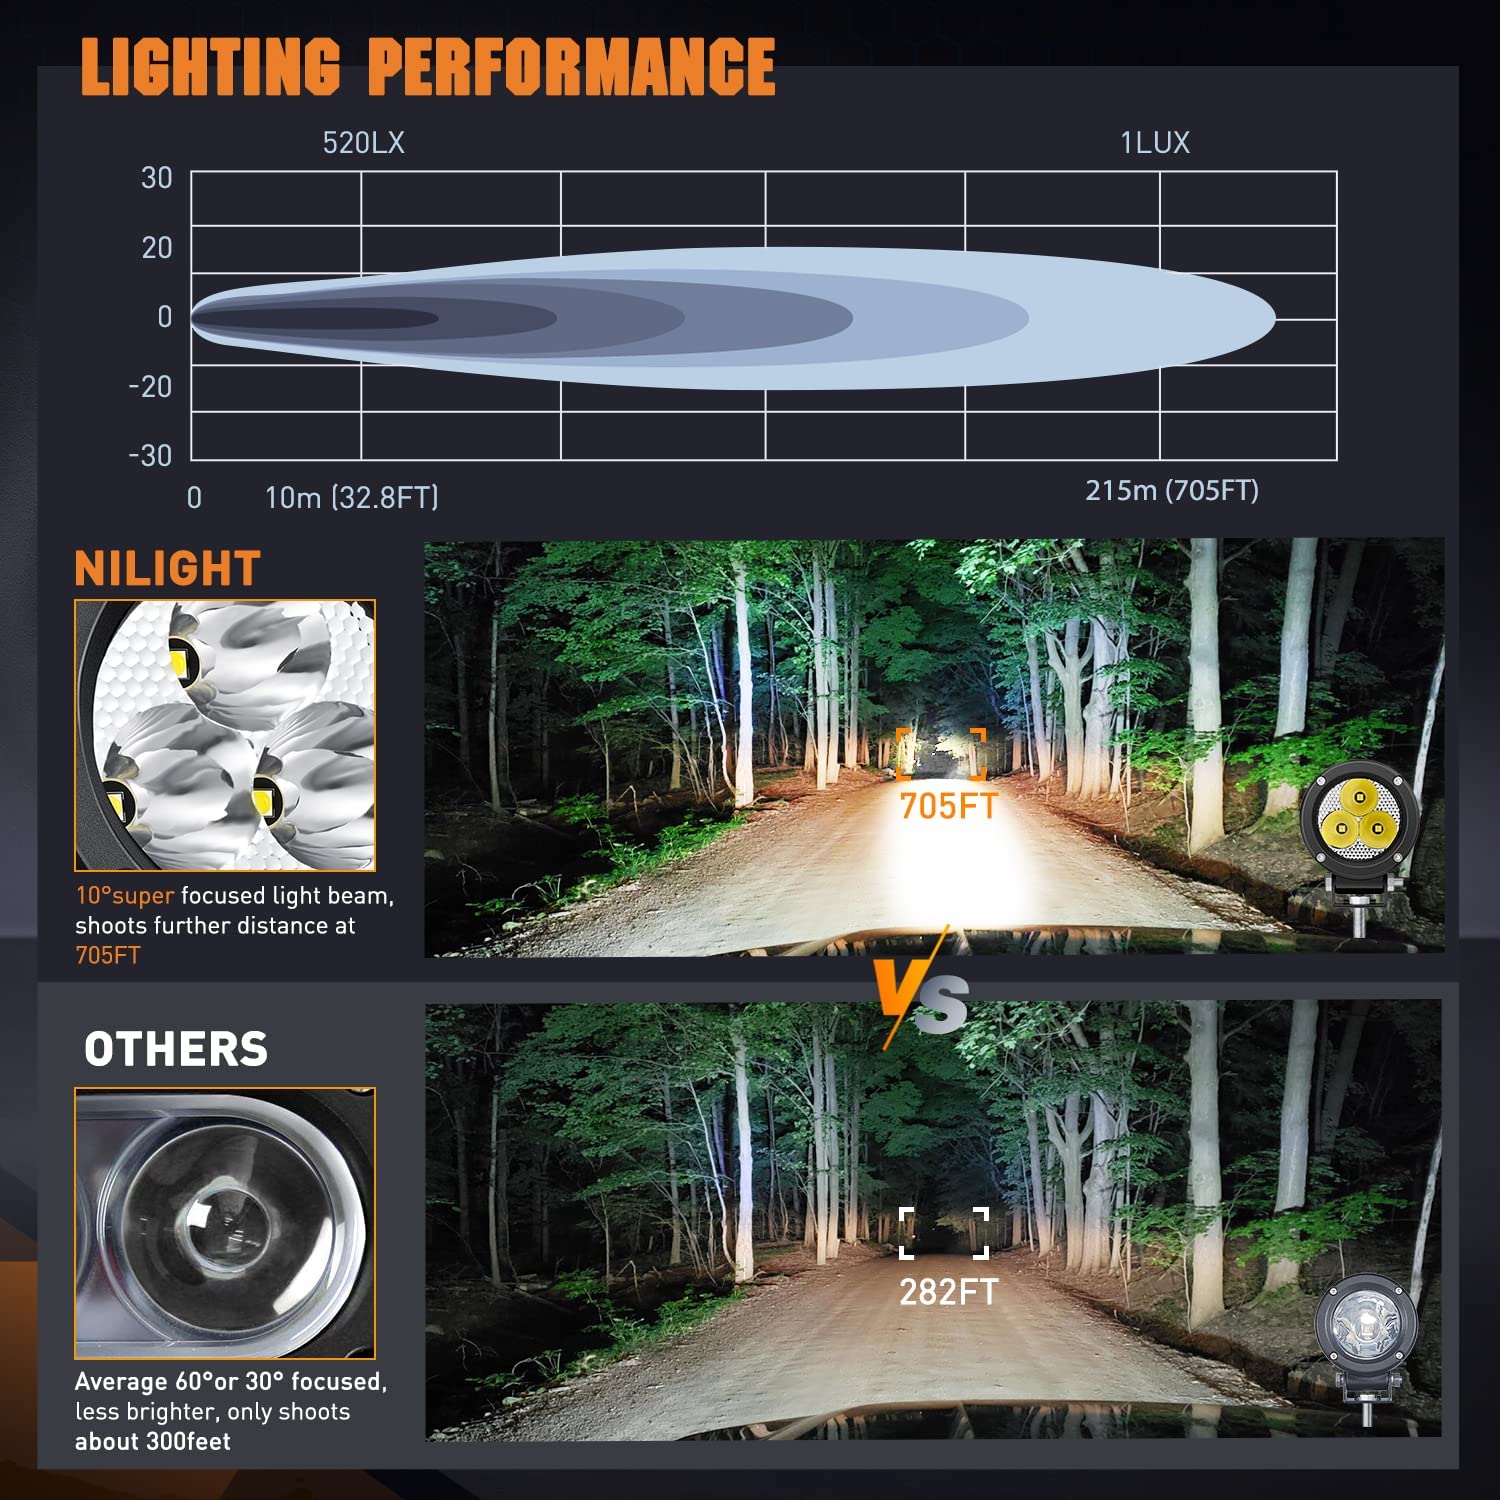 3" 15W 1550LM Spot Round Built-in EMC LED Work Lights (Pair) | 16AWG DT Wire Nilight